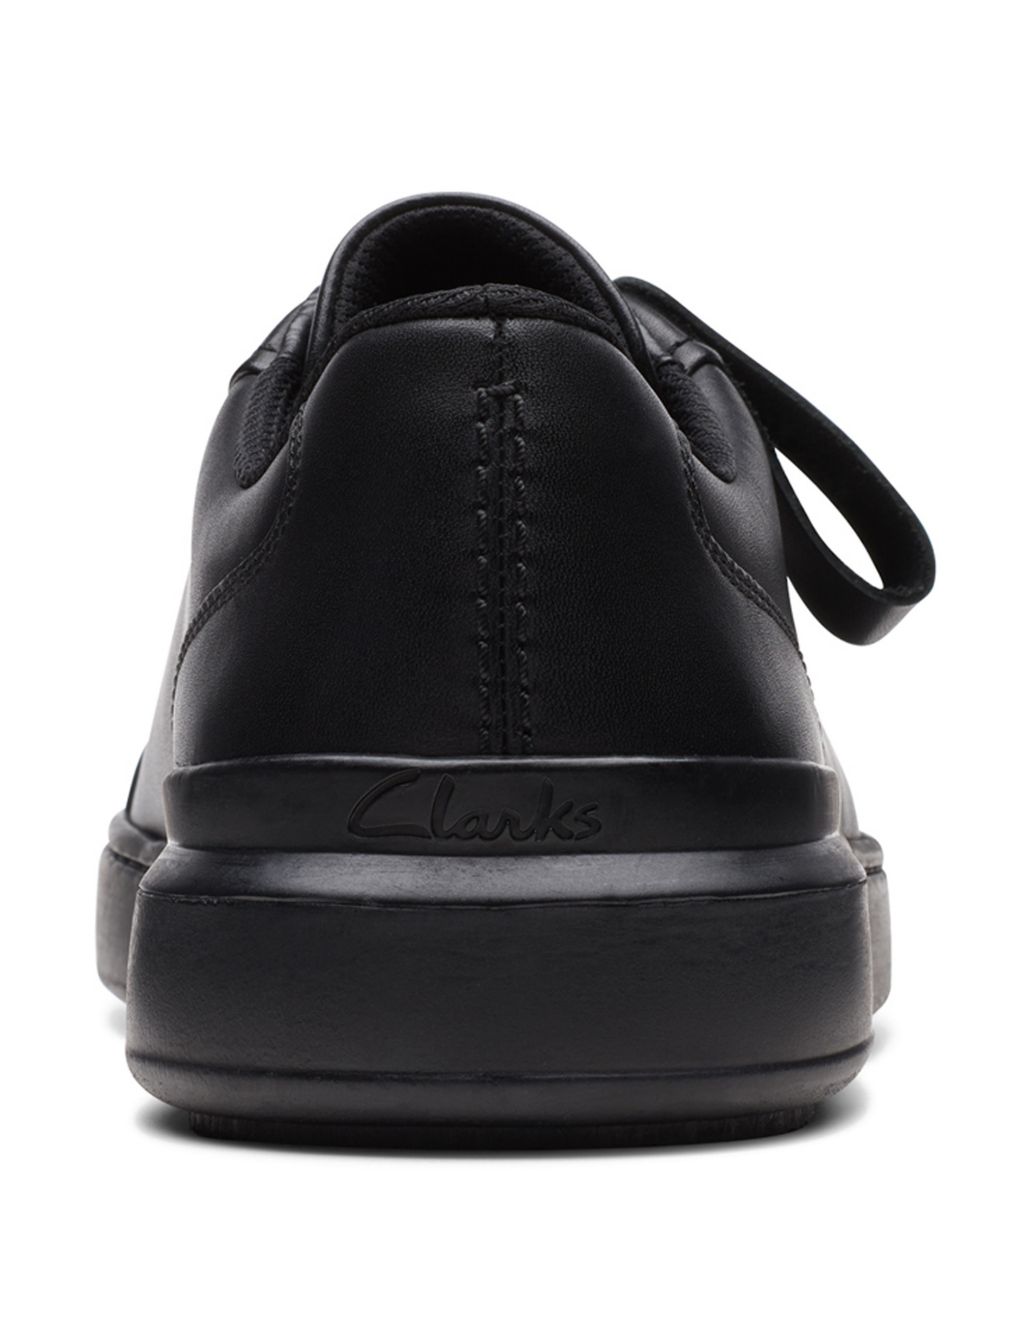 Leather Lace Up Trainers image 7